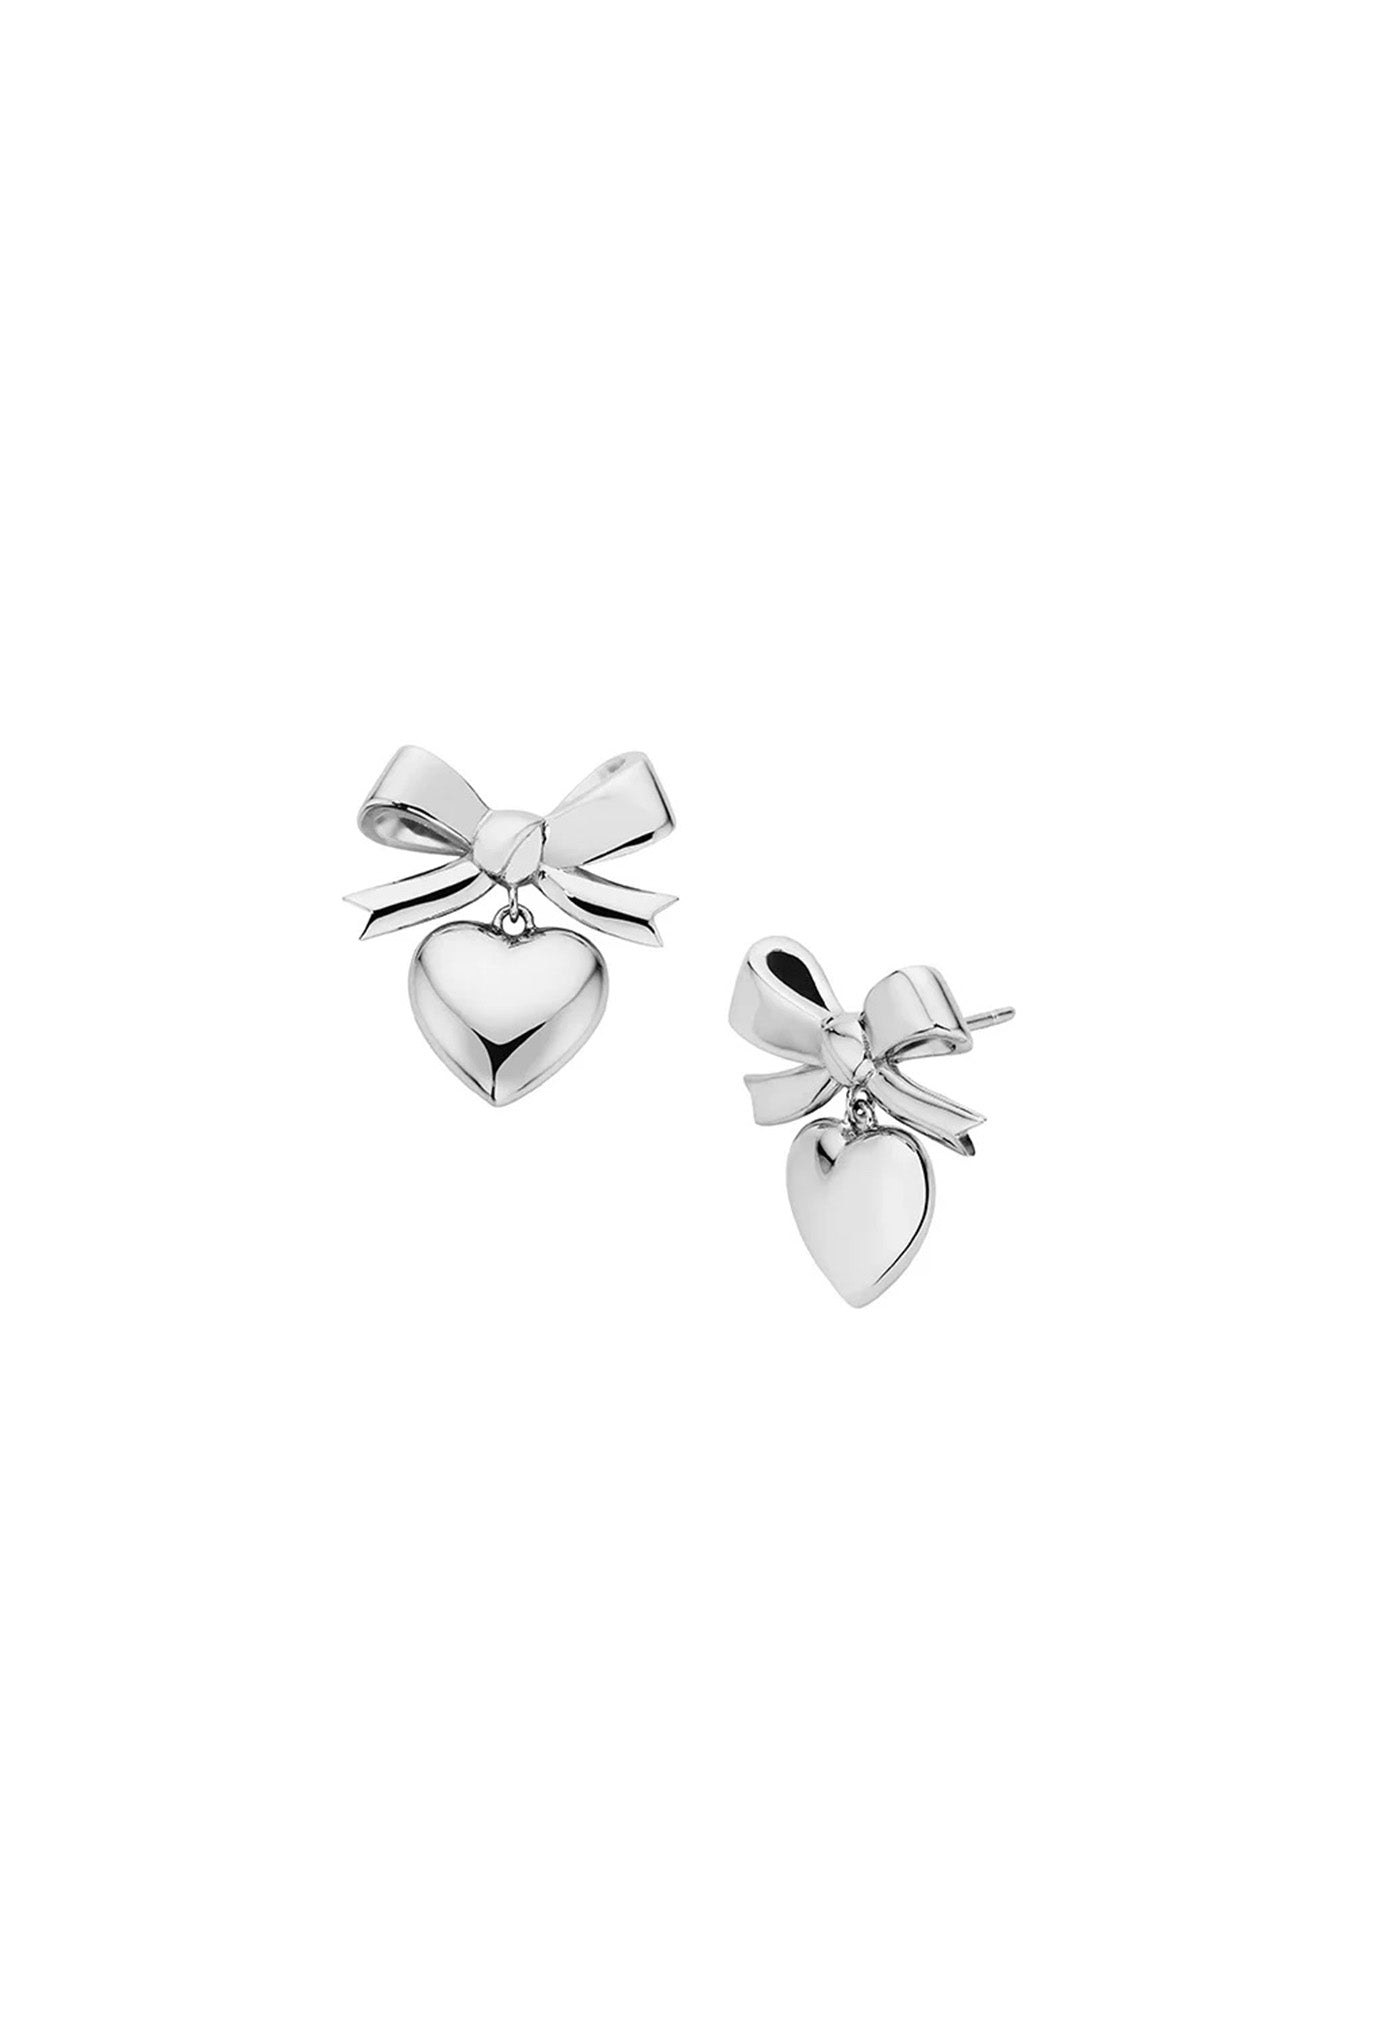 Superlove Bow Earrings - Silver sold by Angel Divine